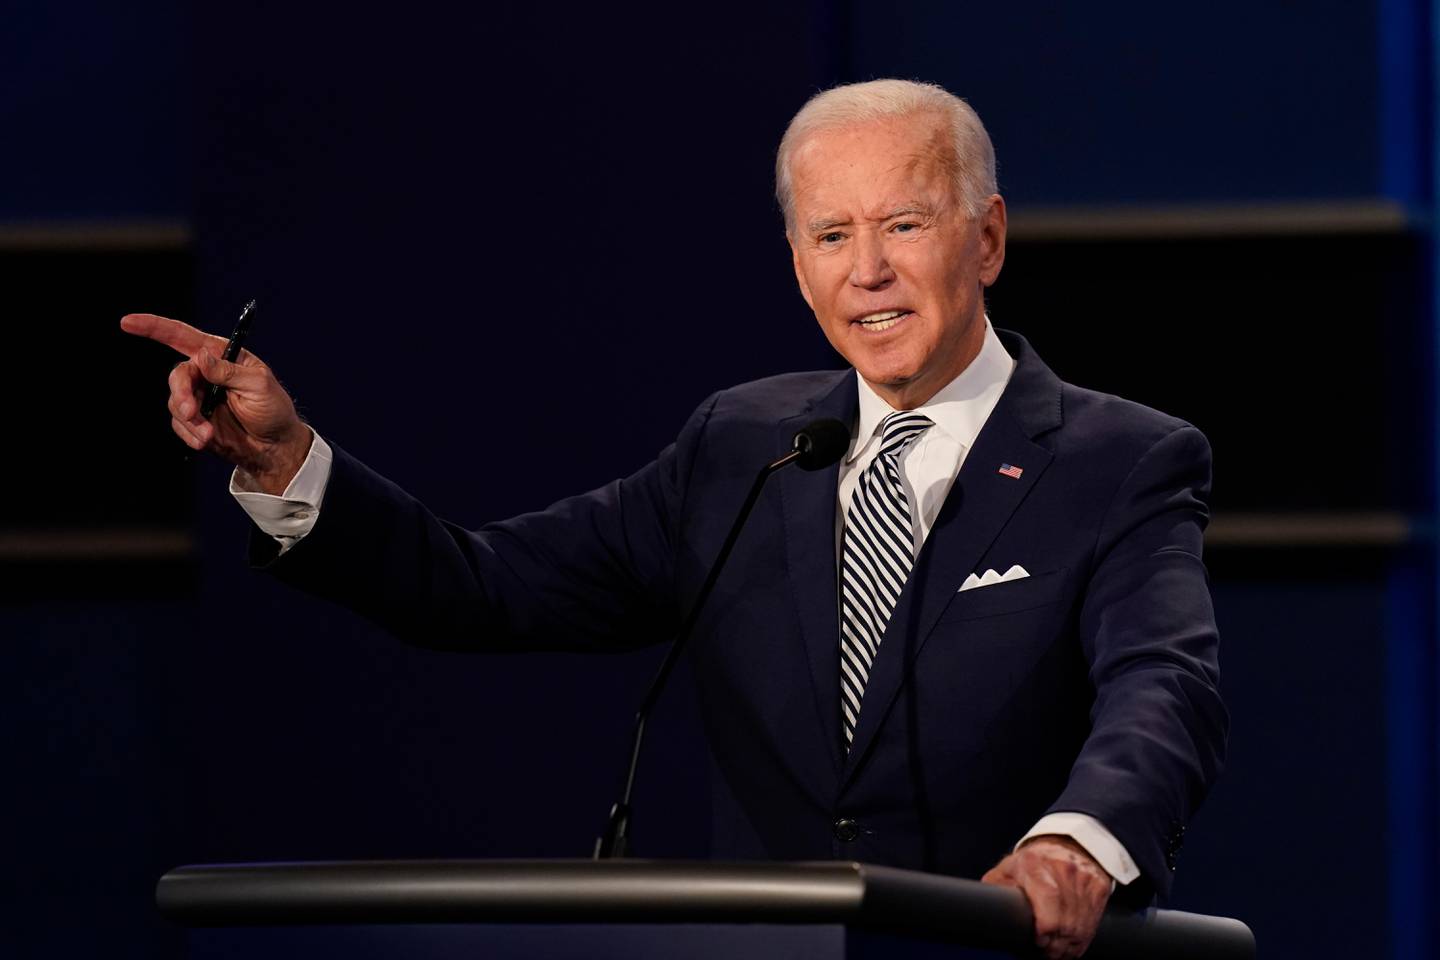 Democratic presidential candidate former Vice President Joe Biden gestures while speaking during the first presidential debate Tuesday, Sept. 29, 2020, at Case Western University and Cleveland Clinic, in Cleveland, Ohio. (AP Photo/Patrick Semansky)